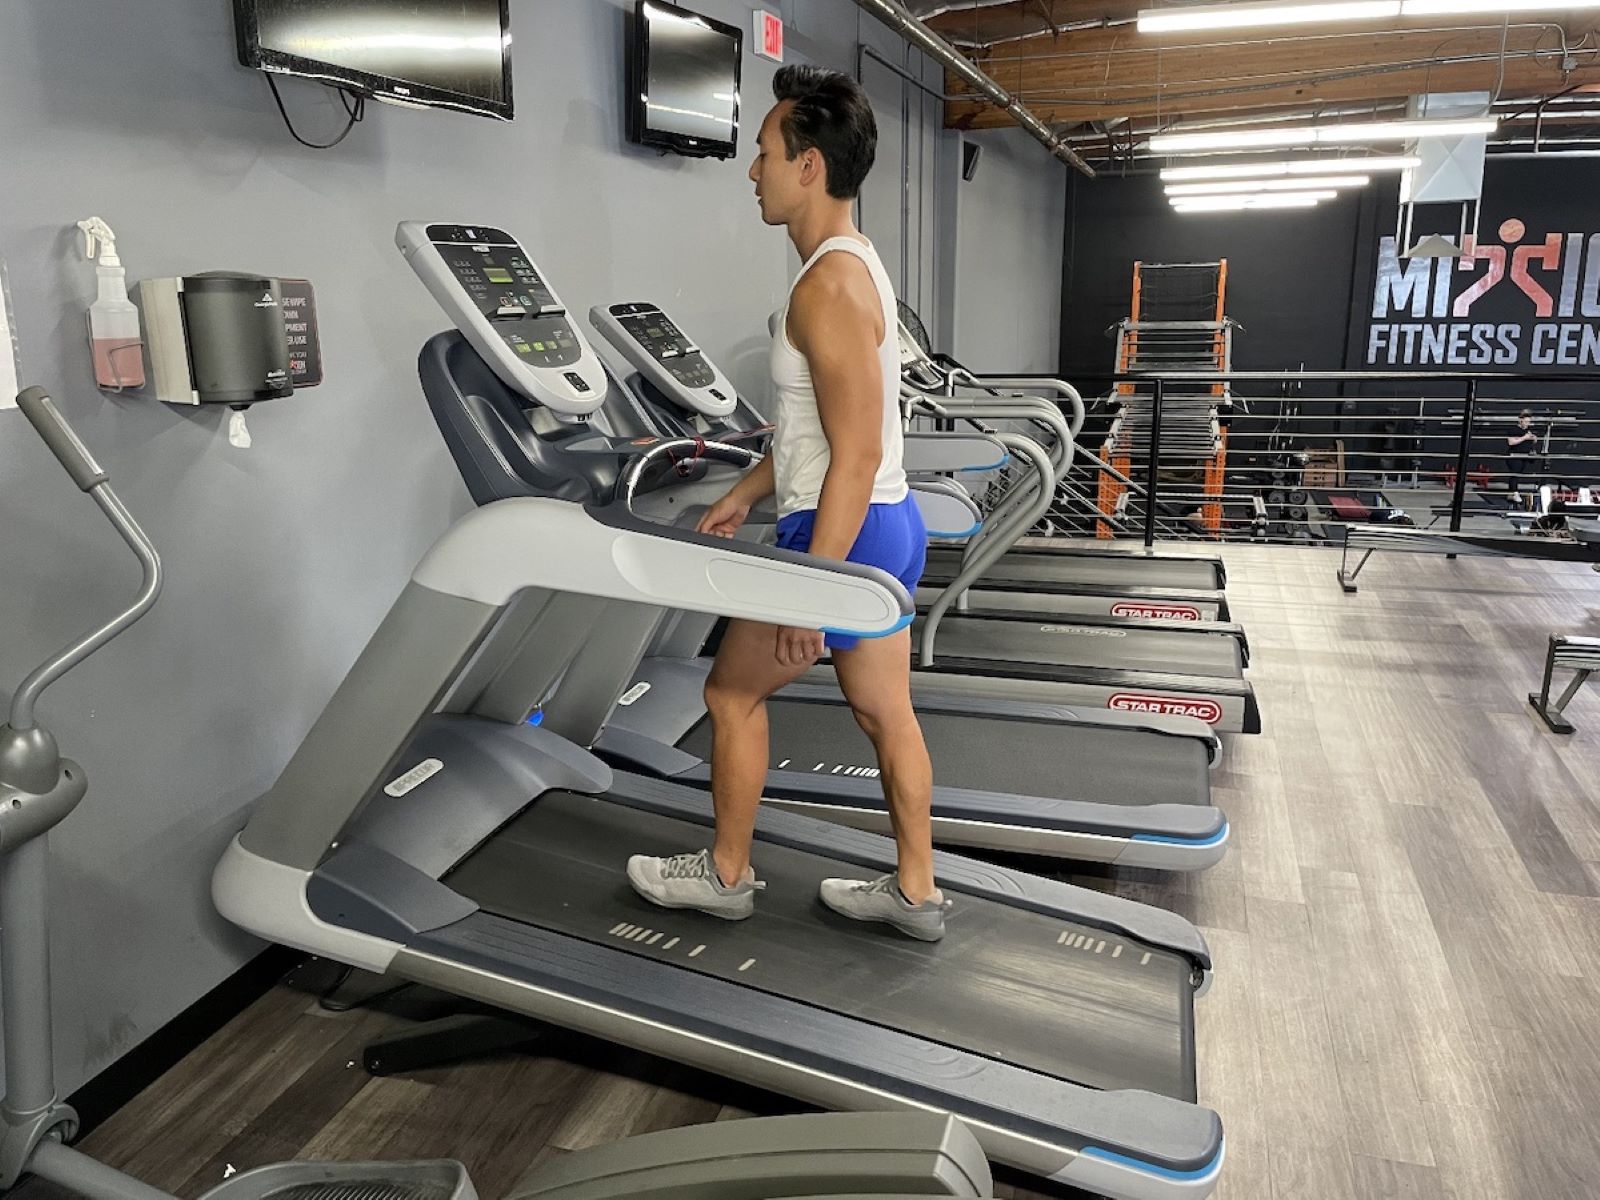 What Does An Incline Do On A Treadmill